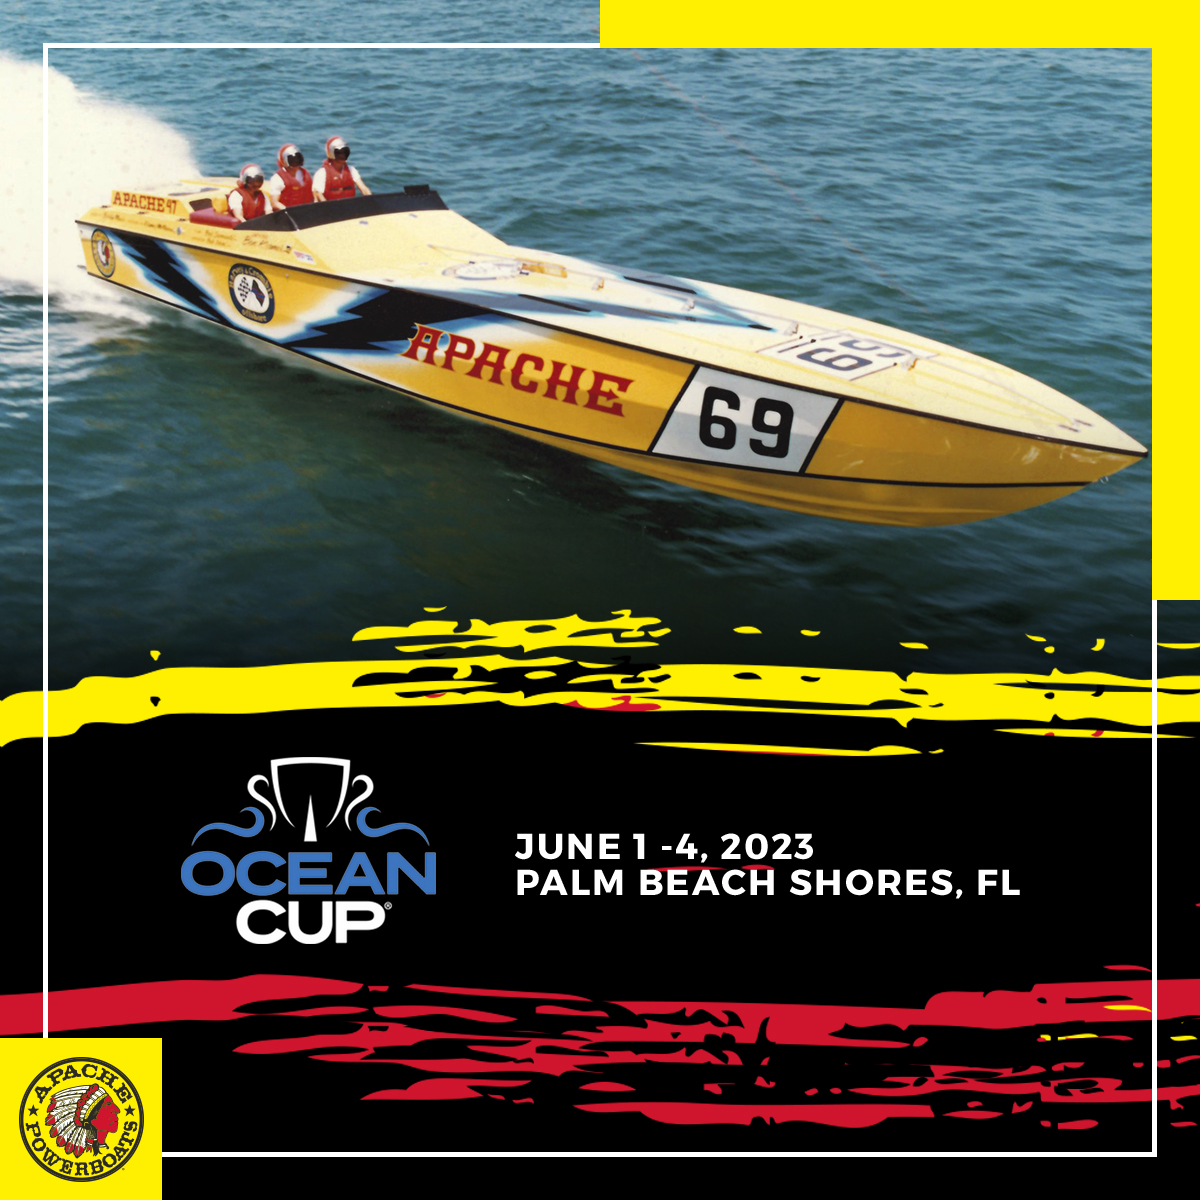 We are so excited for the @oceancup 'Gateway Marathon' race at Sailfish Marina this weekend, where six teams will be competing for World Records on the water, including an Apache 47’ piloted by Lorne Leibel, Bobby Latham, and Ryan Beckley!🏁🏆 #ApachePowerboats #Powerboats